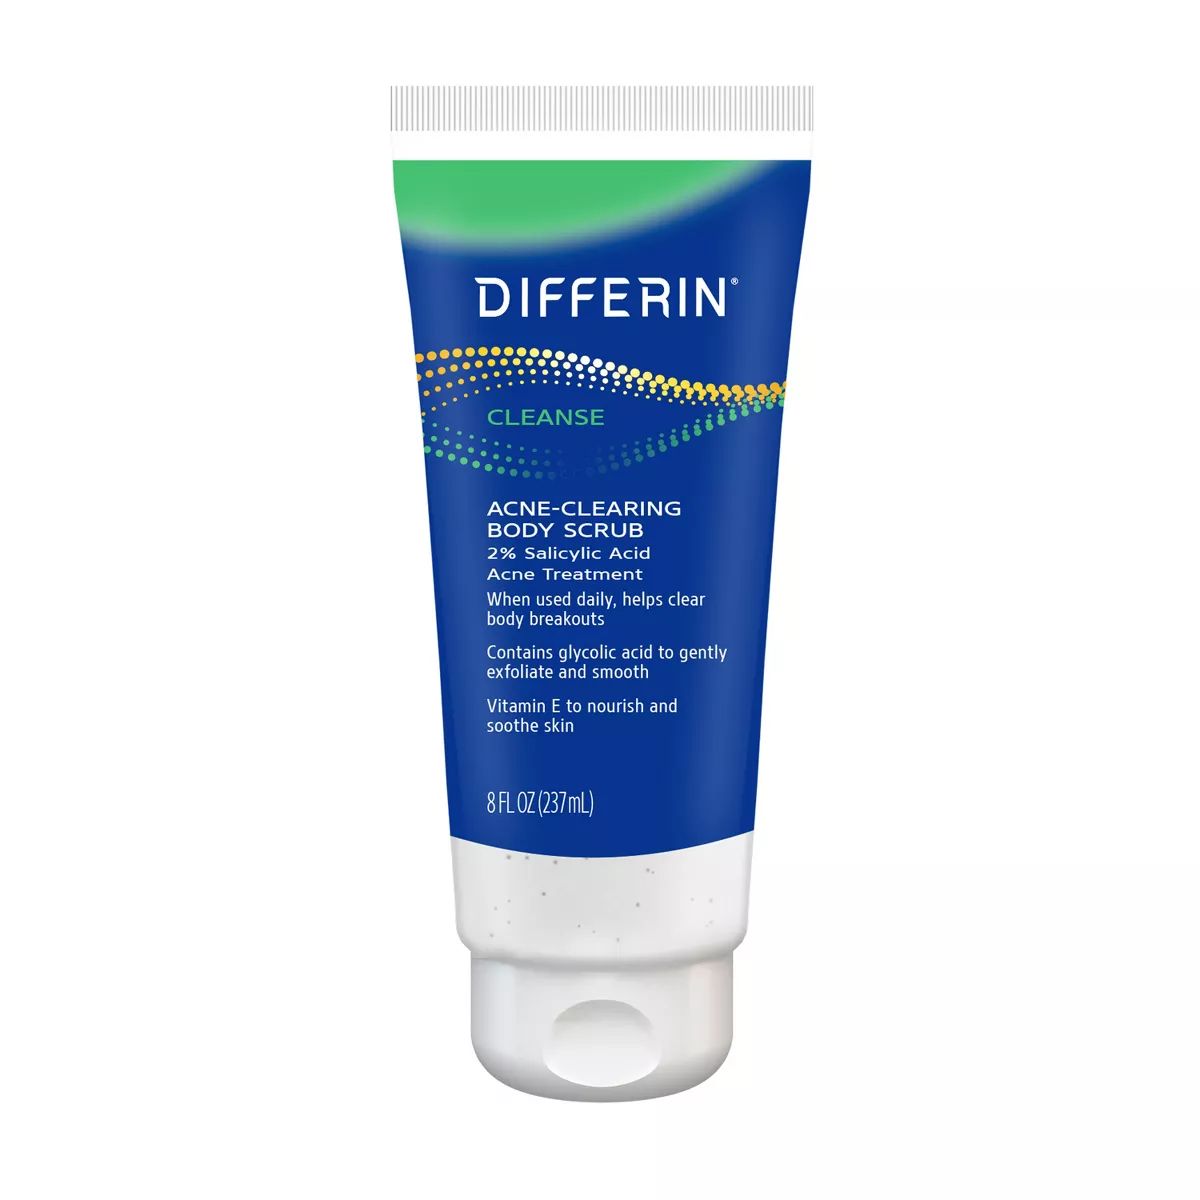 Differin Acne Clearing Scented Daily Body Scrub - 8 fl oz | Target